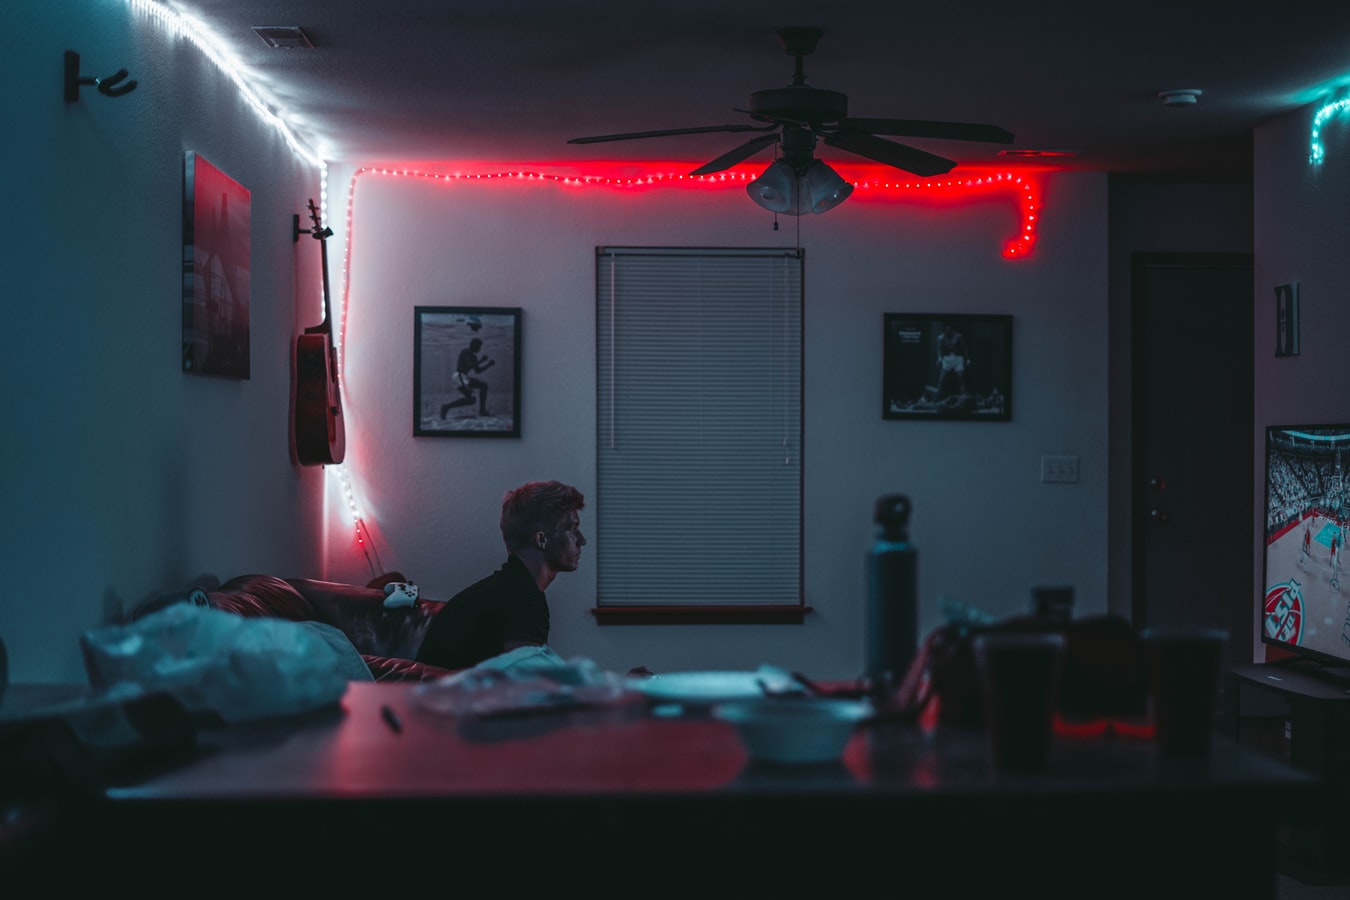 A teenager sitting in a dark room playing video games